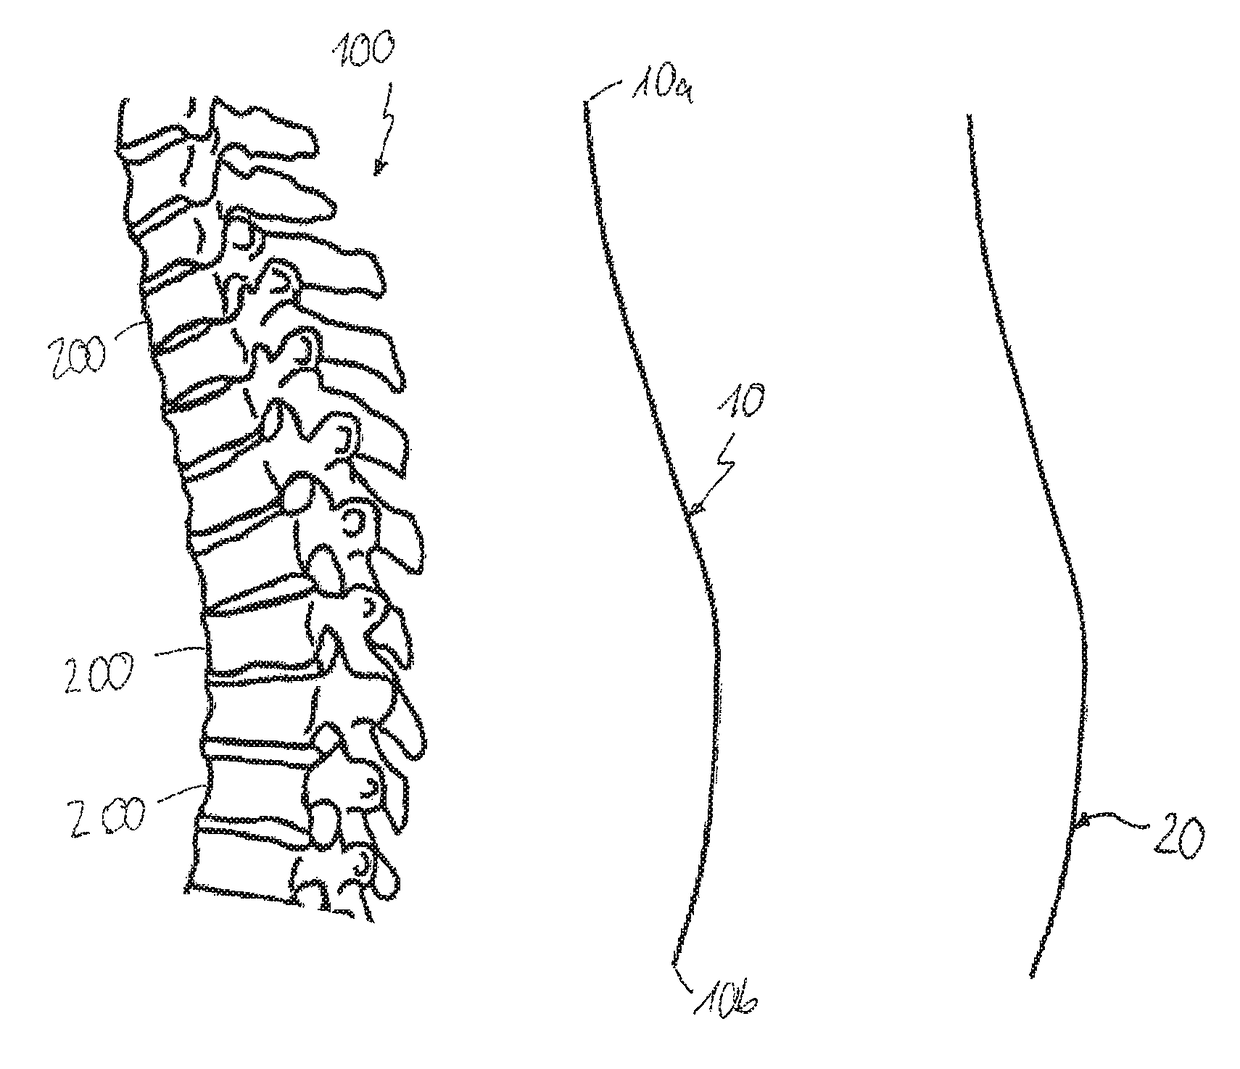 Method of using template in manufacturing an implant for spinal or other orthopedic fixation